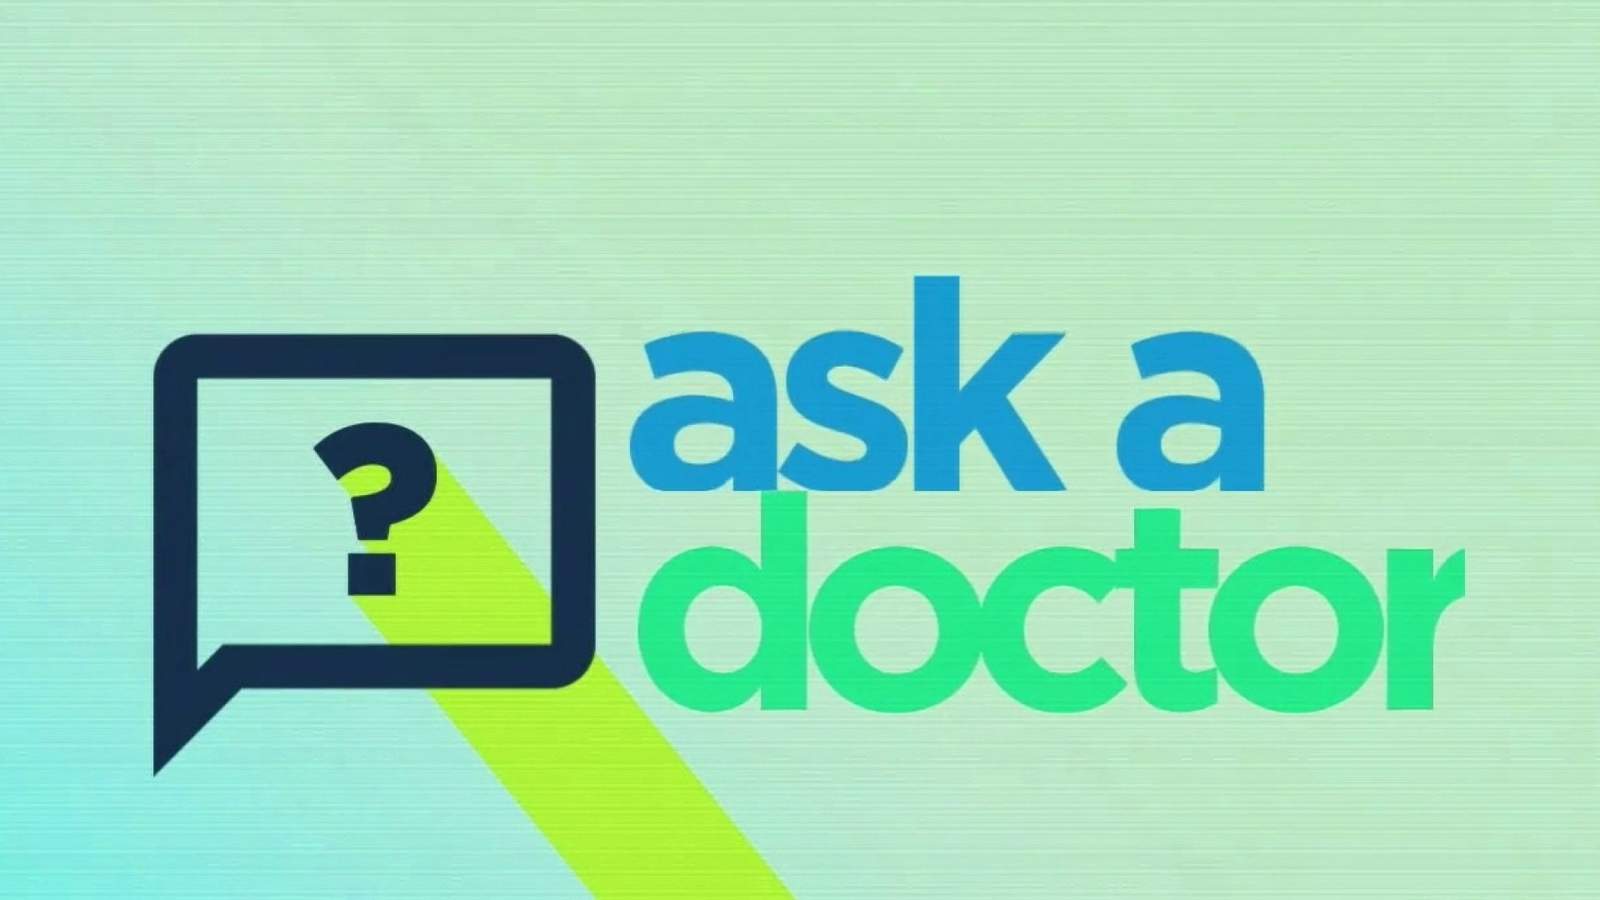 Ask a doctor: Impact of inequity, COVID-19 on mental health of Black youth